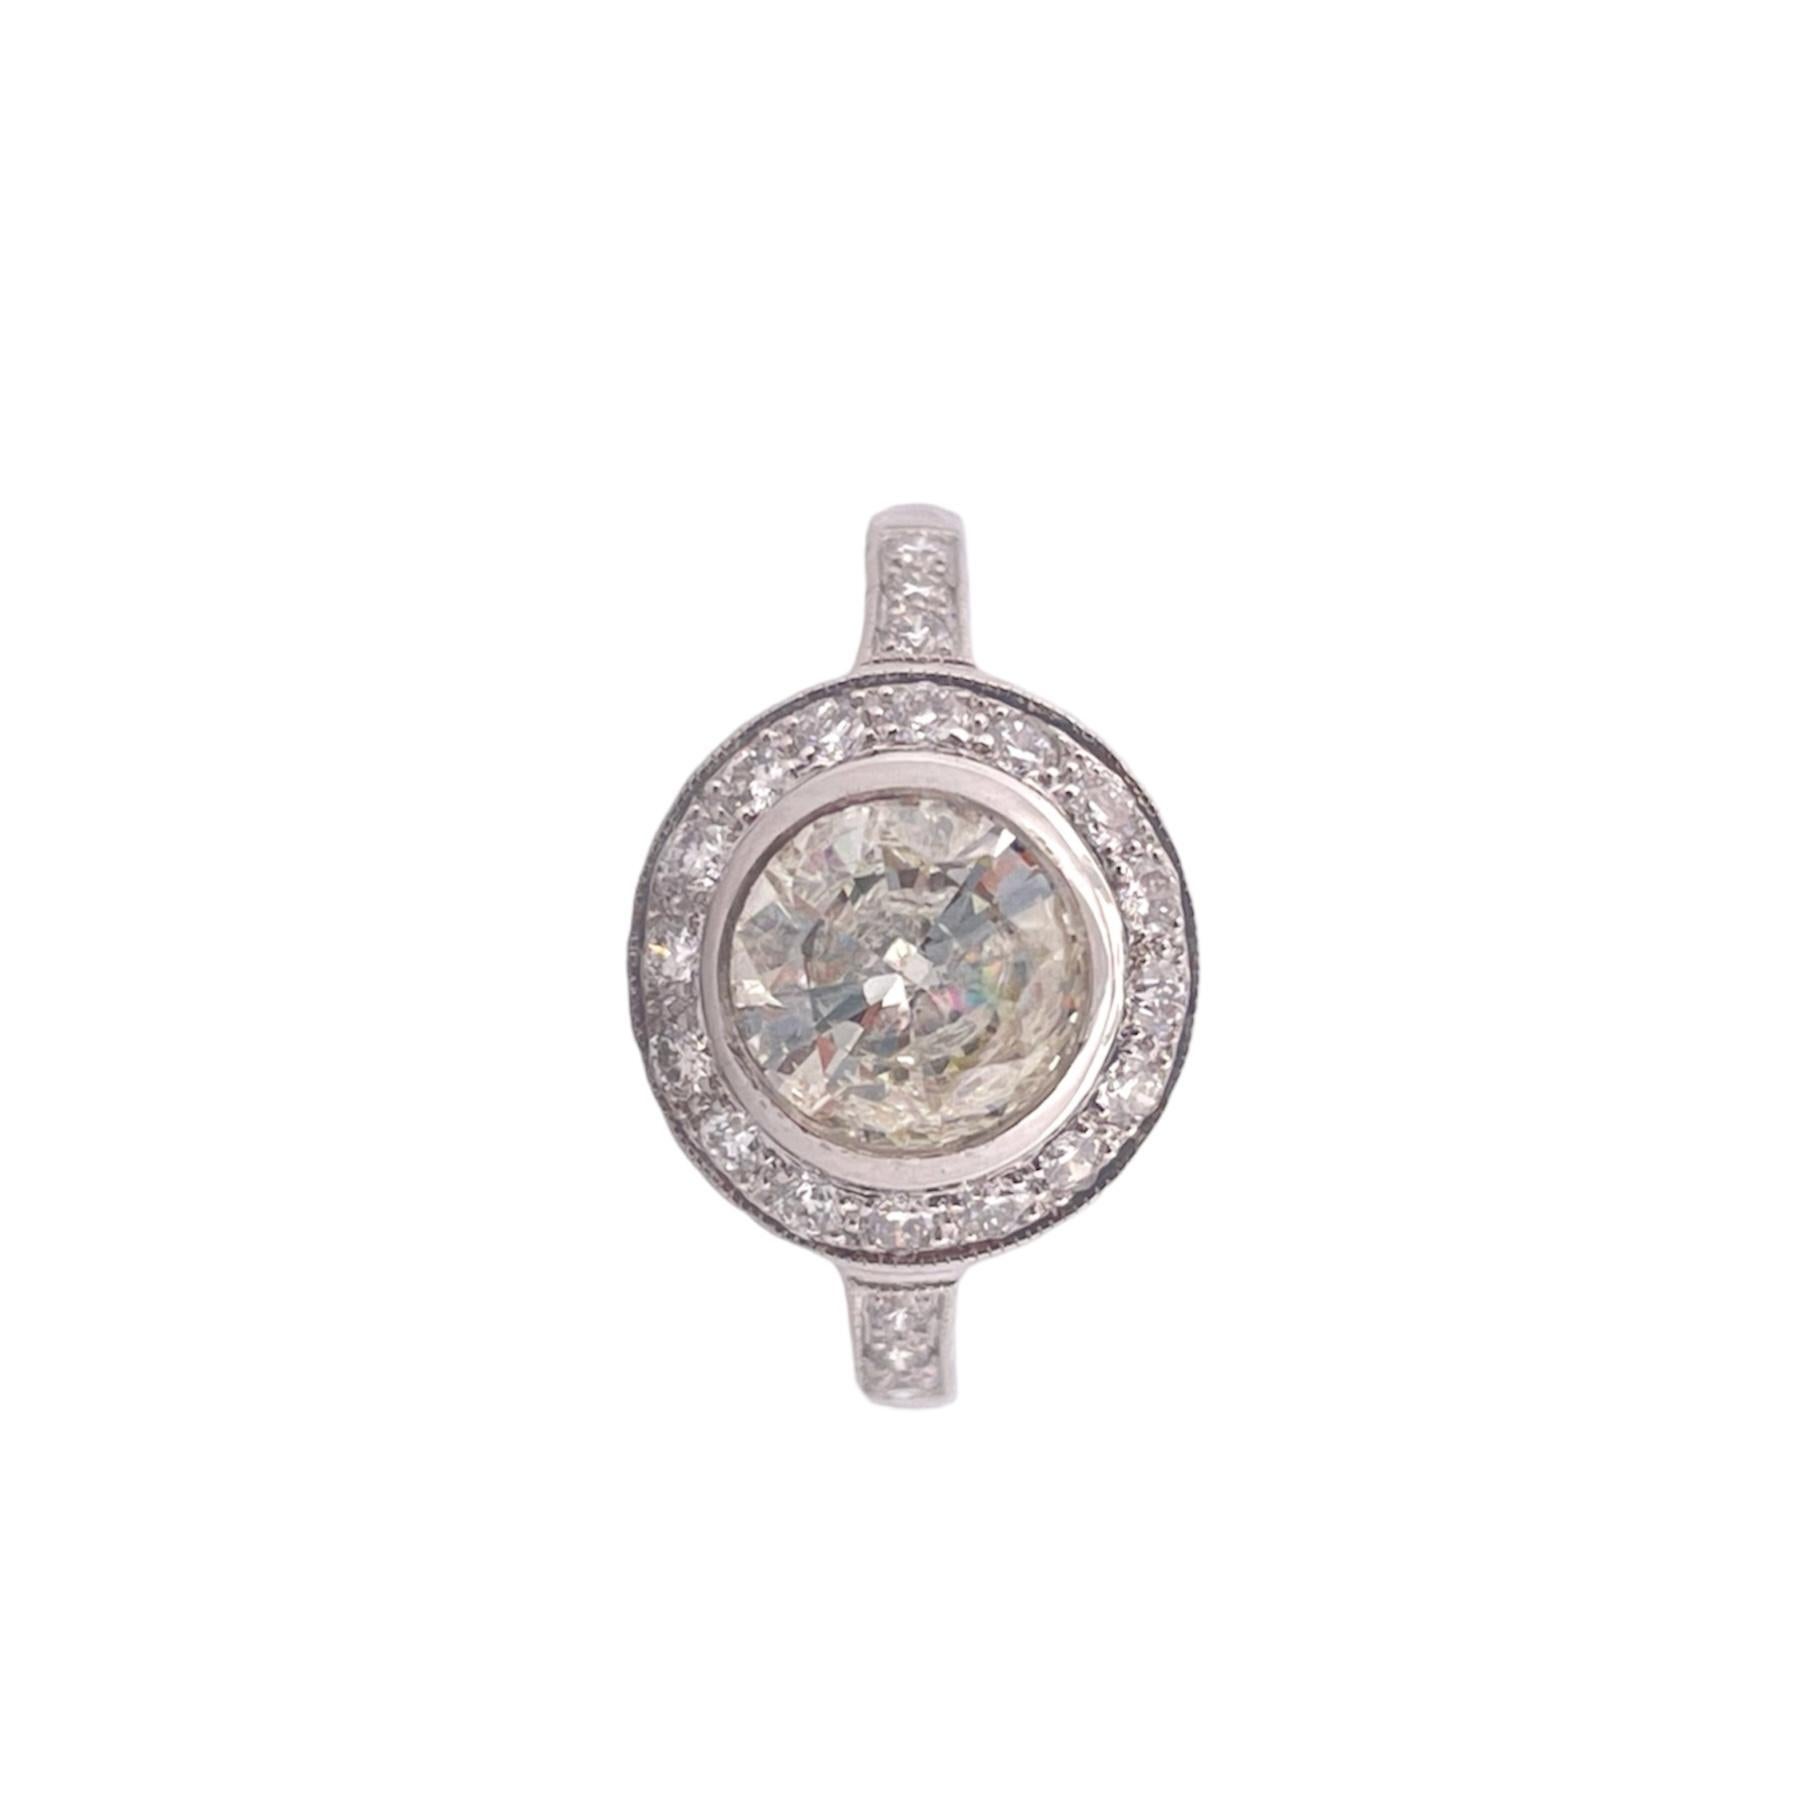 Indulge in the ultimate expression of luxury with this exquisite Diamond Halo Ring, featuring a brilliant 1.03-carat center diamond,
surrounded by a mesmerizing halo of diamonds with a total carat weight (TCW) of 0.40. 
This stunning piece is set in